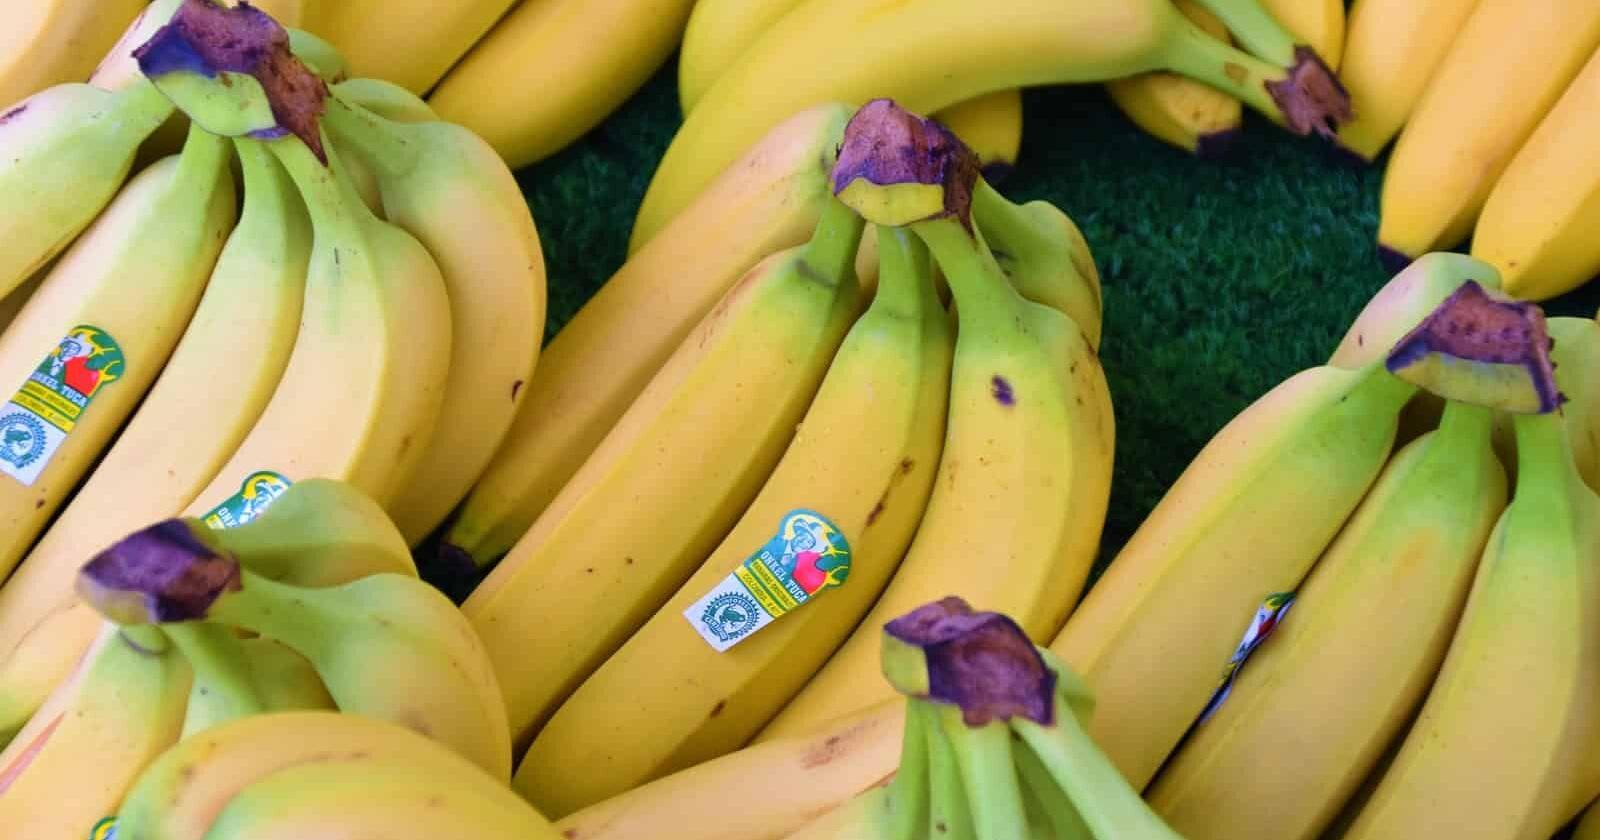 How to store bananas – so they’re fresh for longer